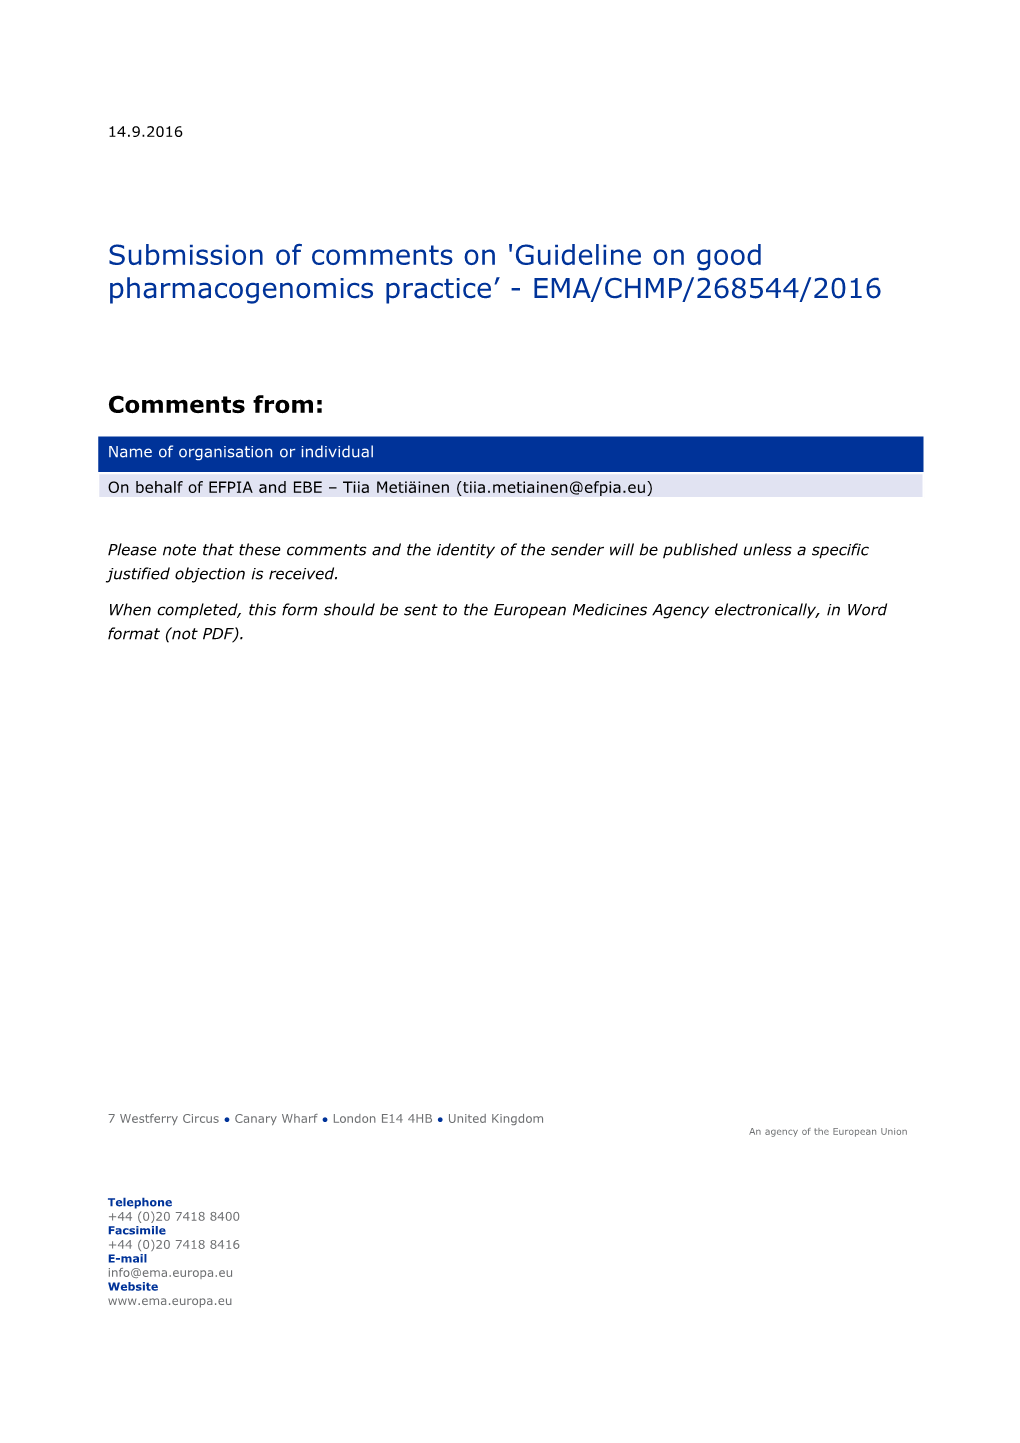 Submission of Comments on 'Guideline on Good Pharmacogenomics Practice - EMA/CHMP/268544/2016